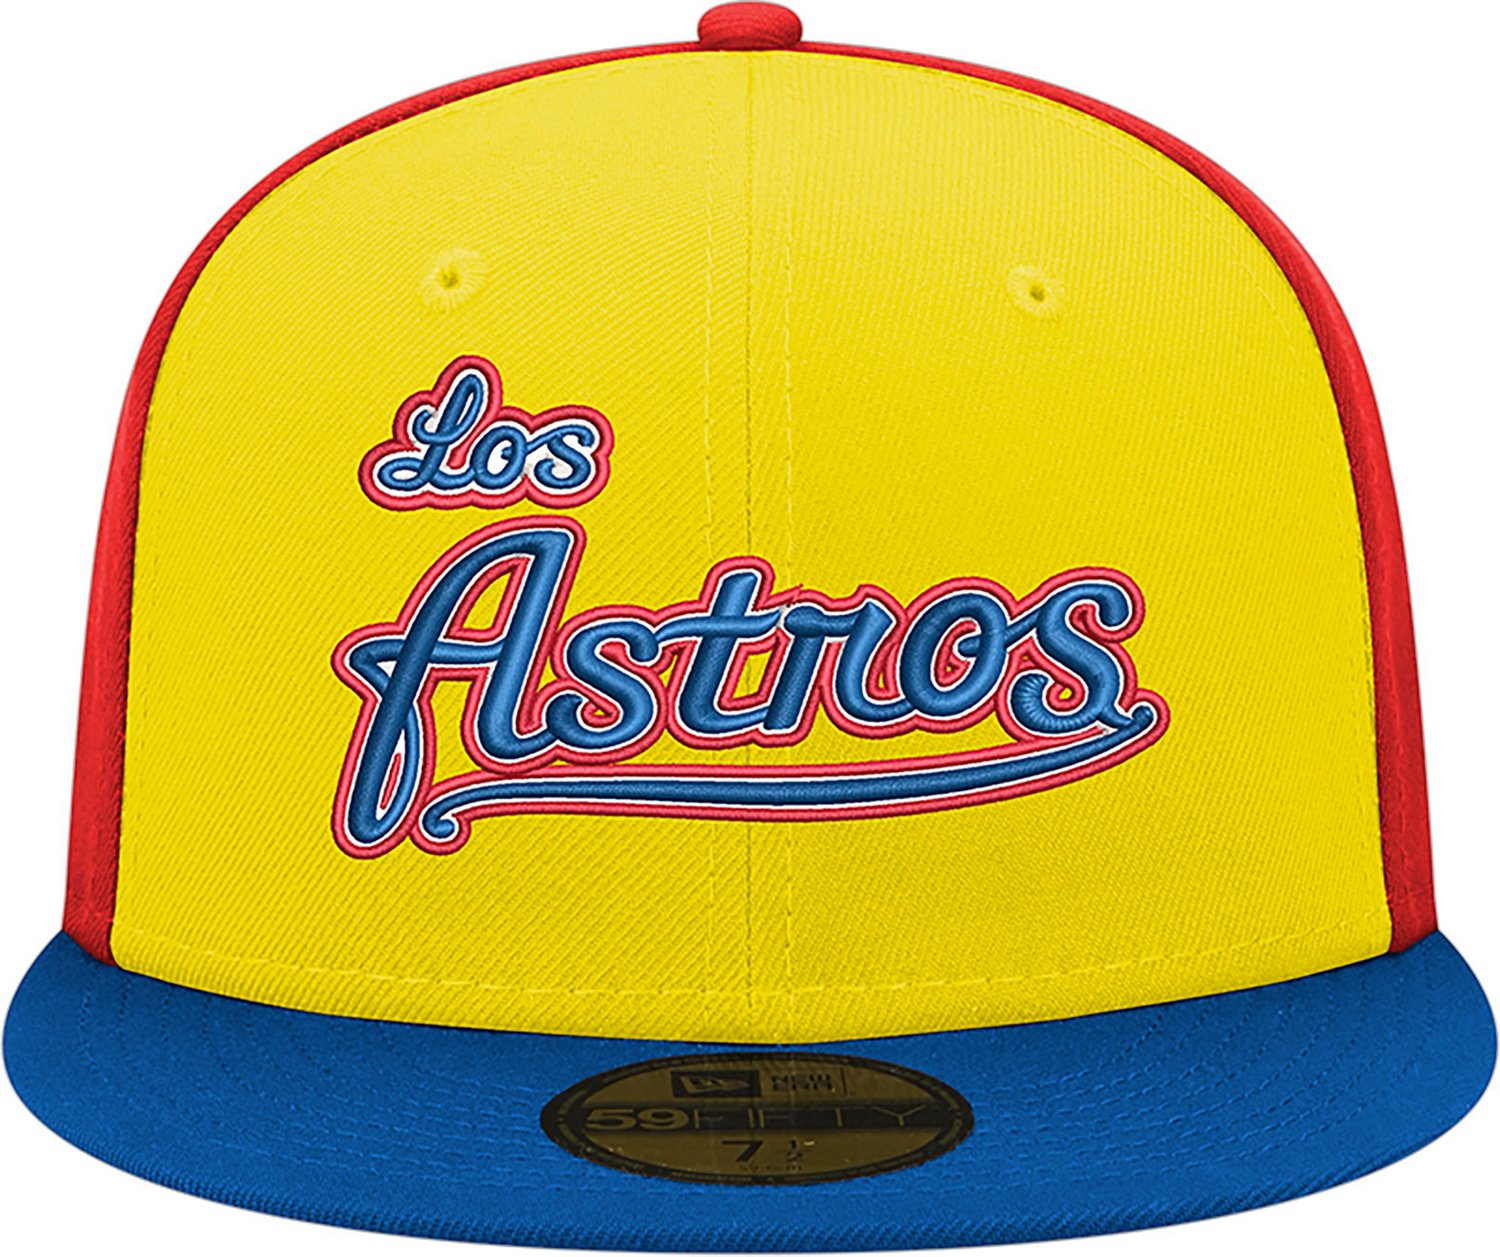 Academy Sports + Outdoors Launches Houston Astros Mi Patria Collection in  Celebration of Hispanic Heritage Month